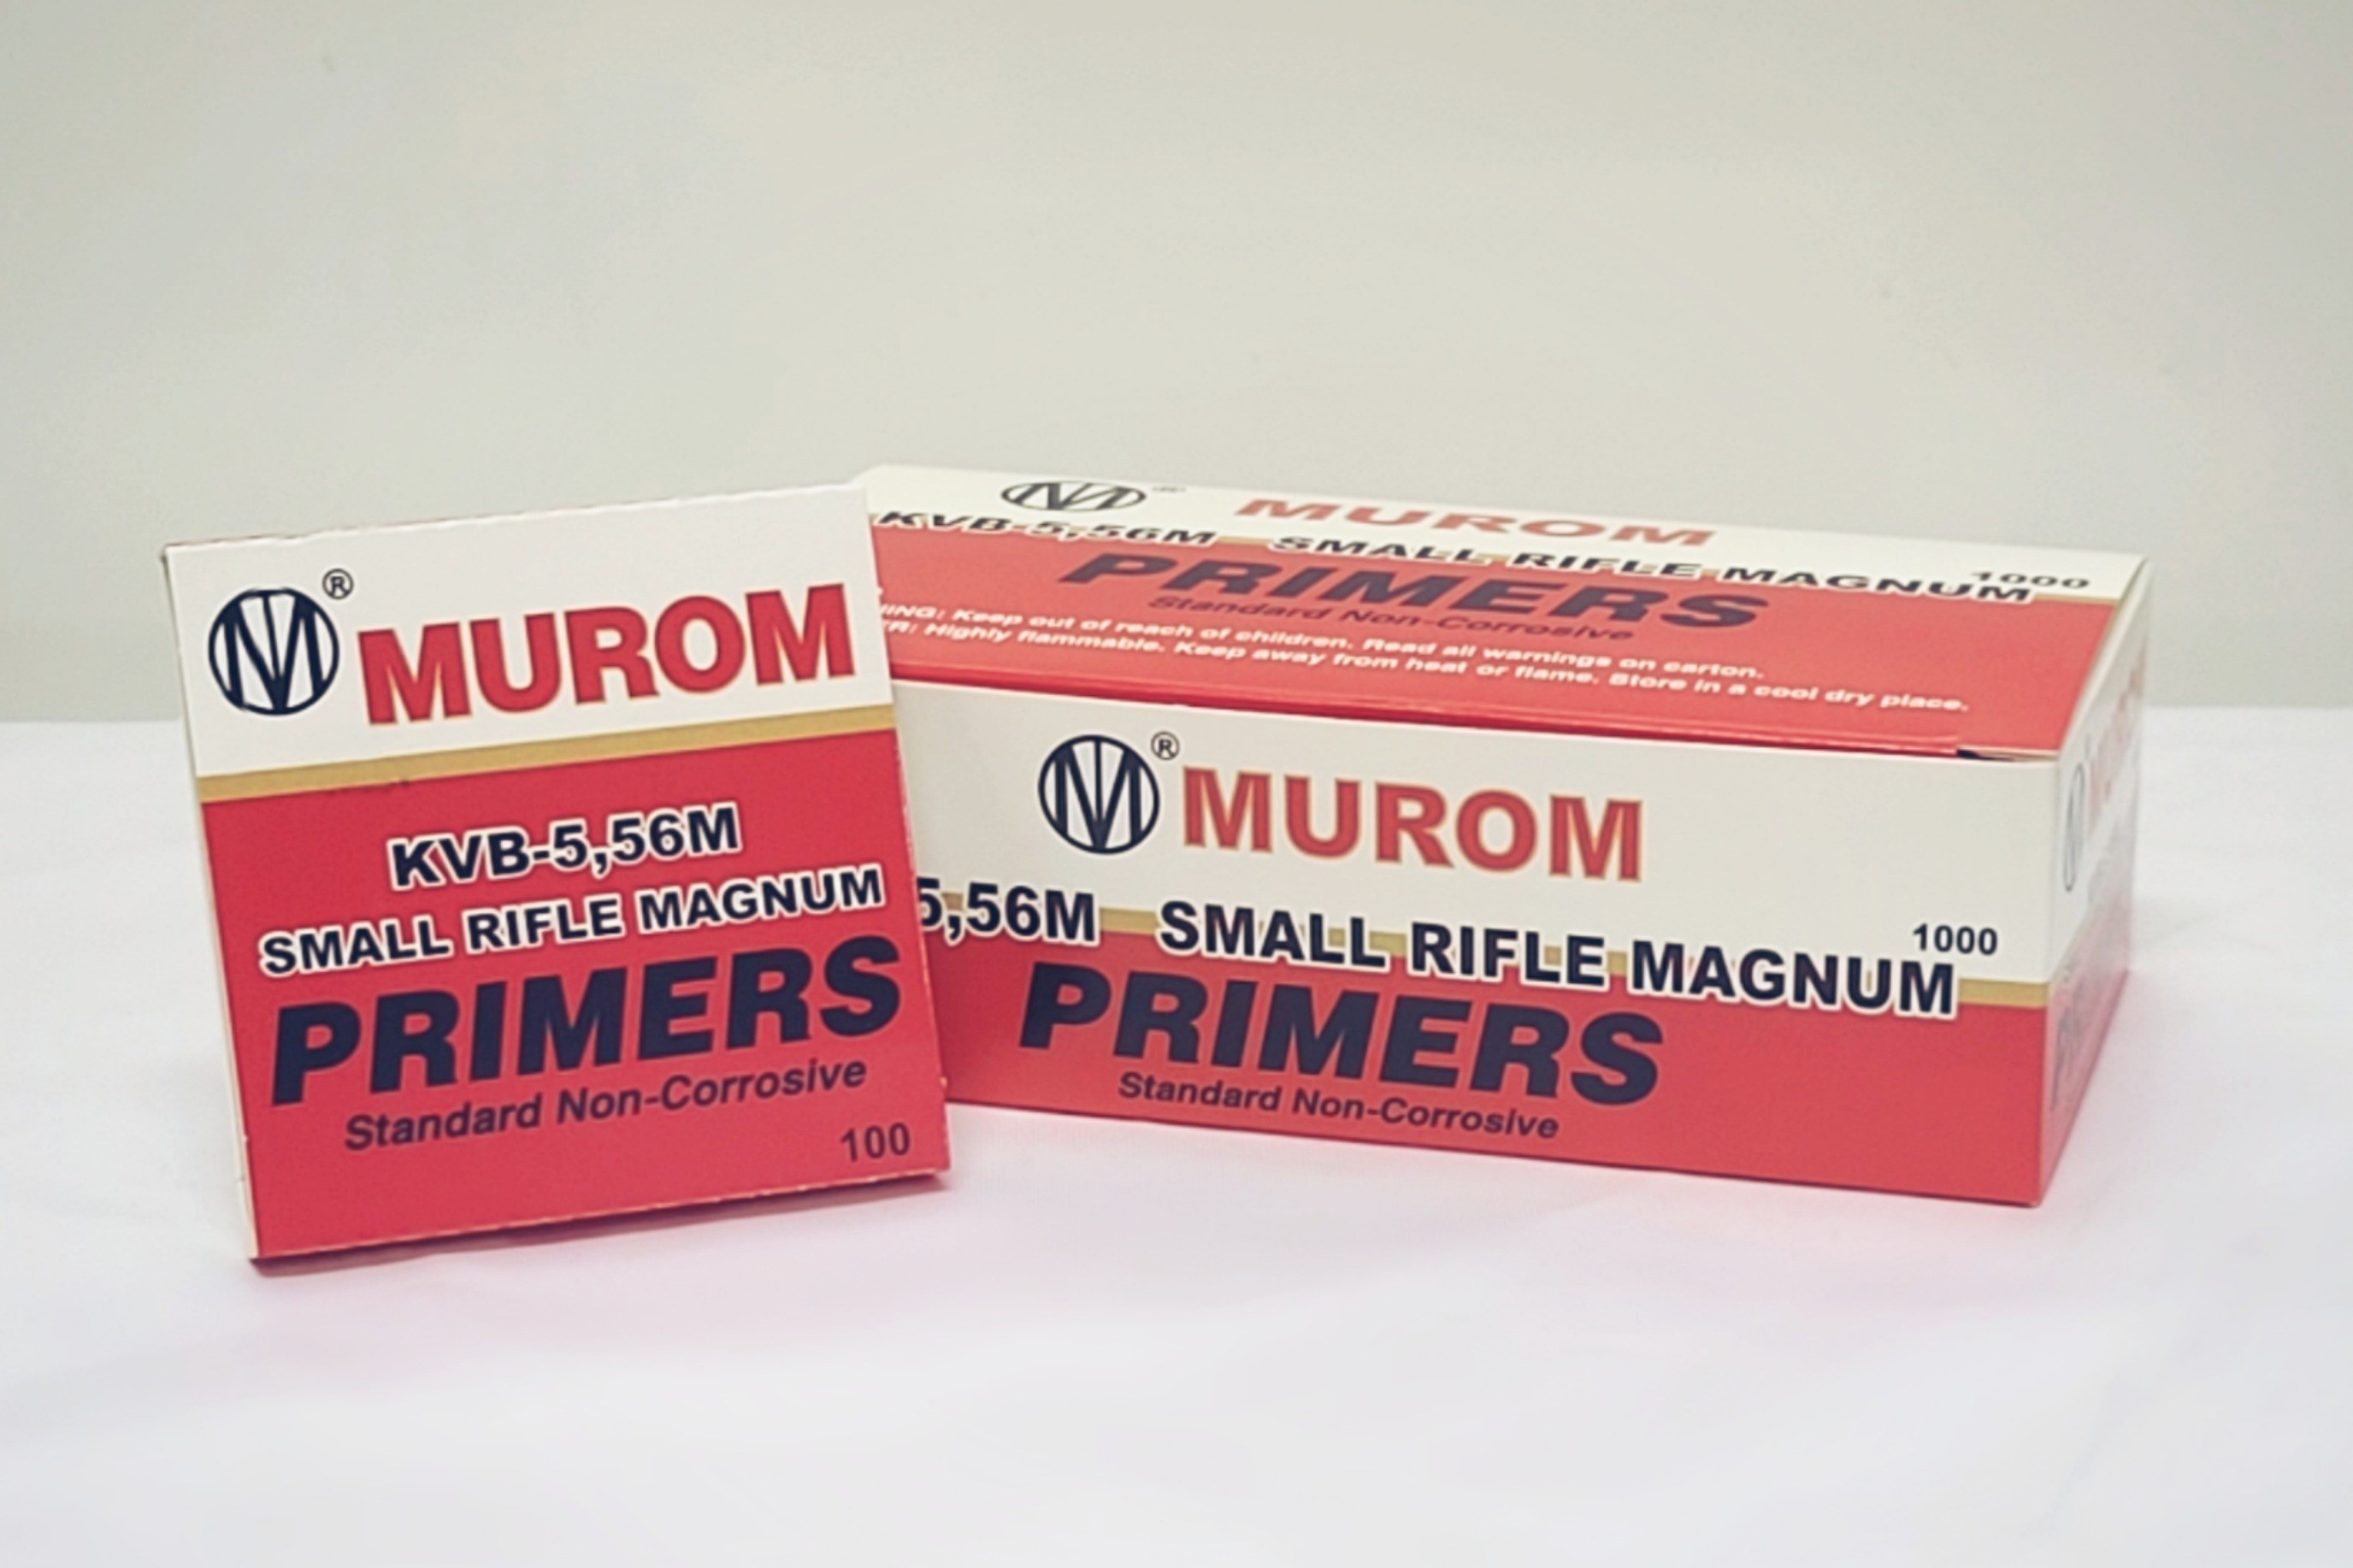 MUROM SMALL RIFLE PRIMERS